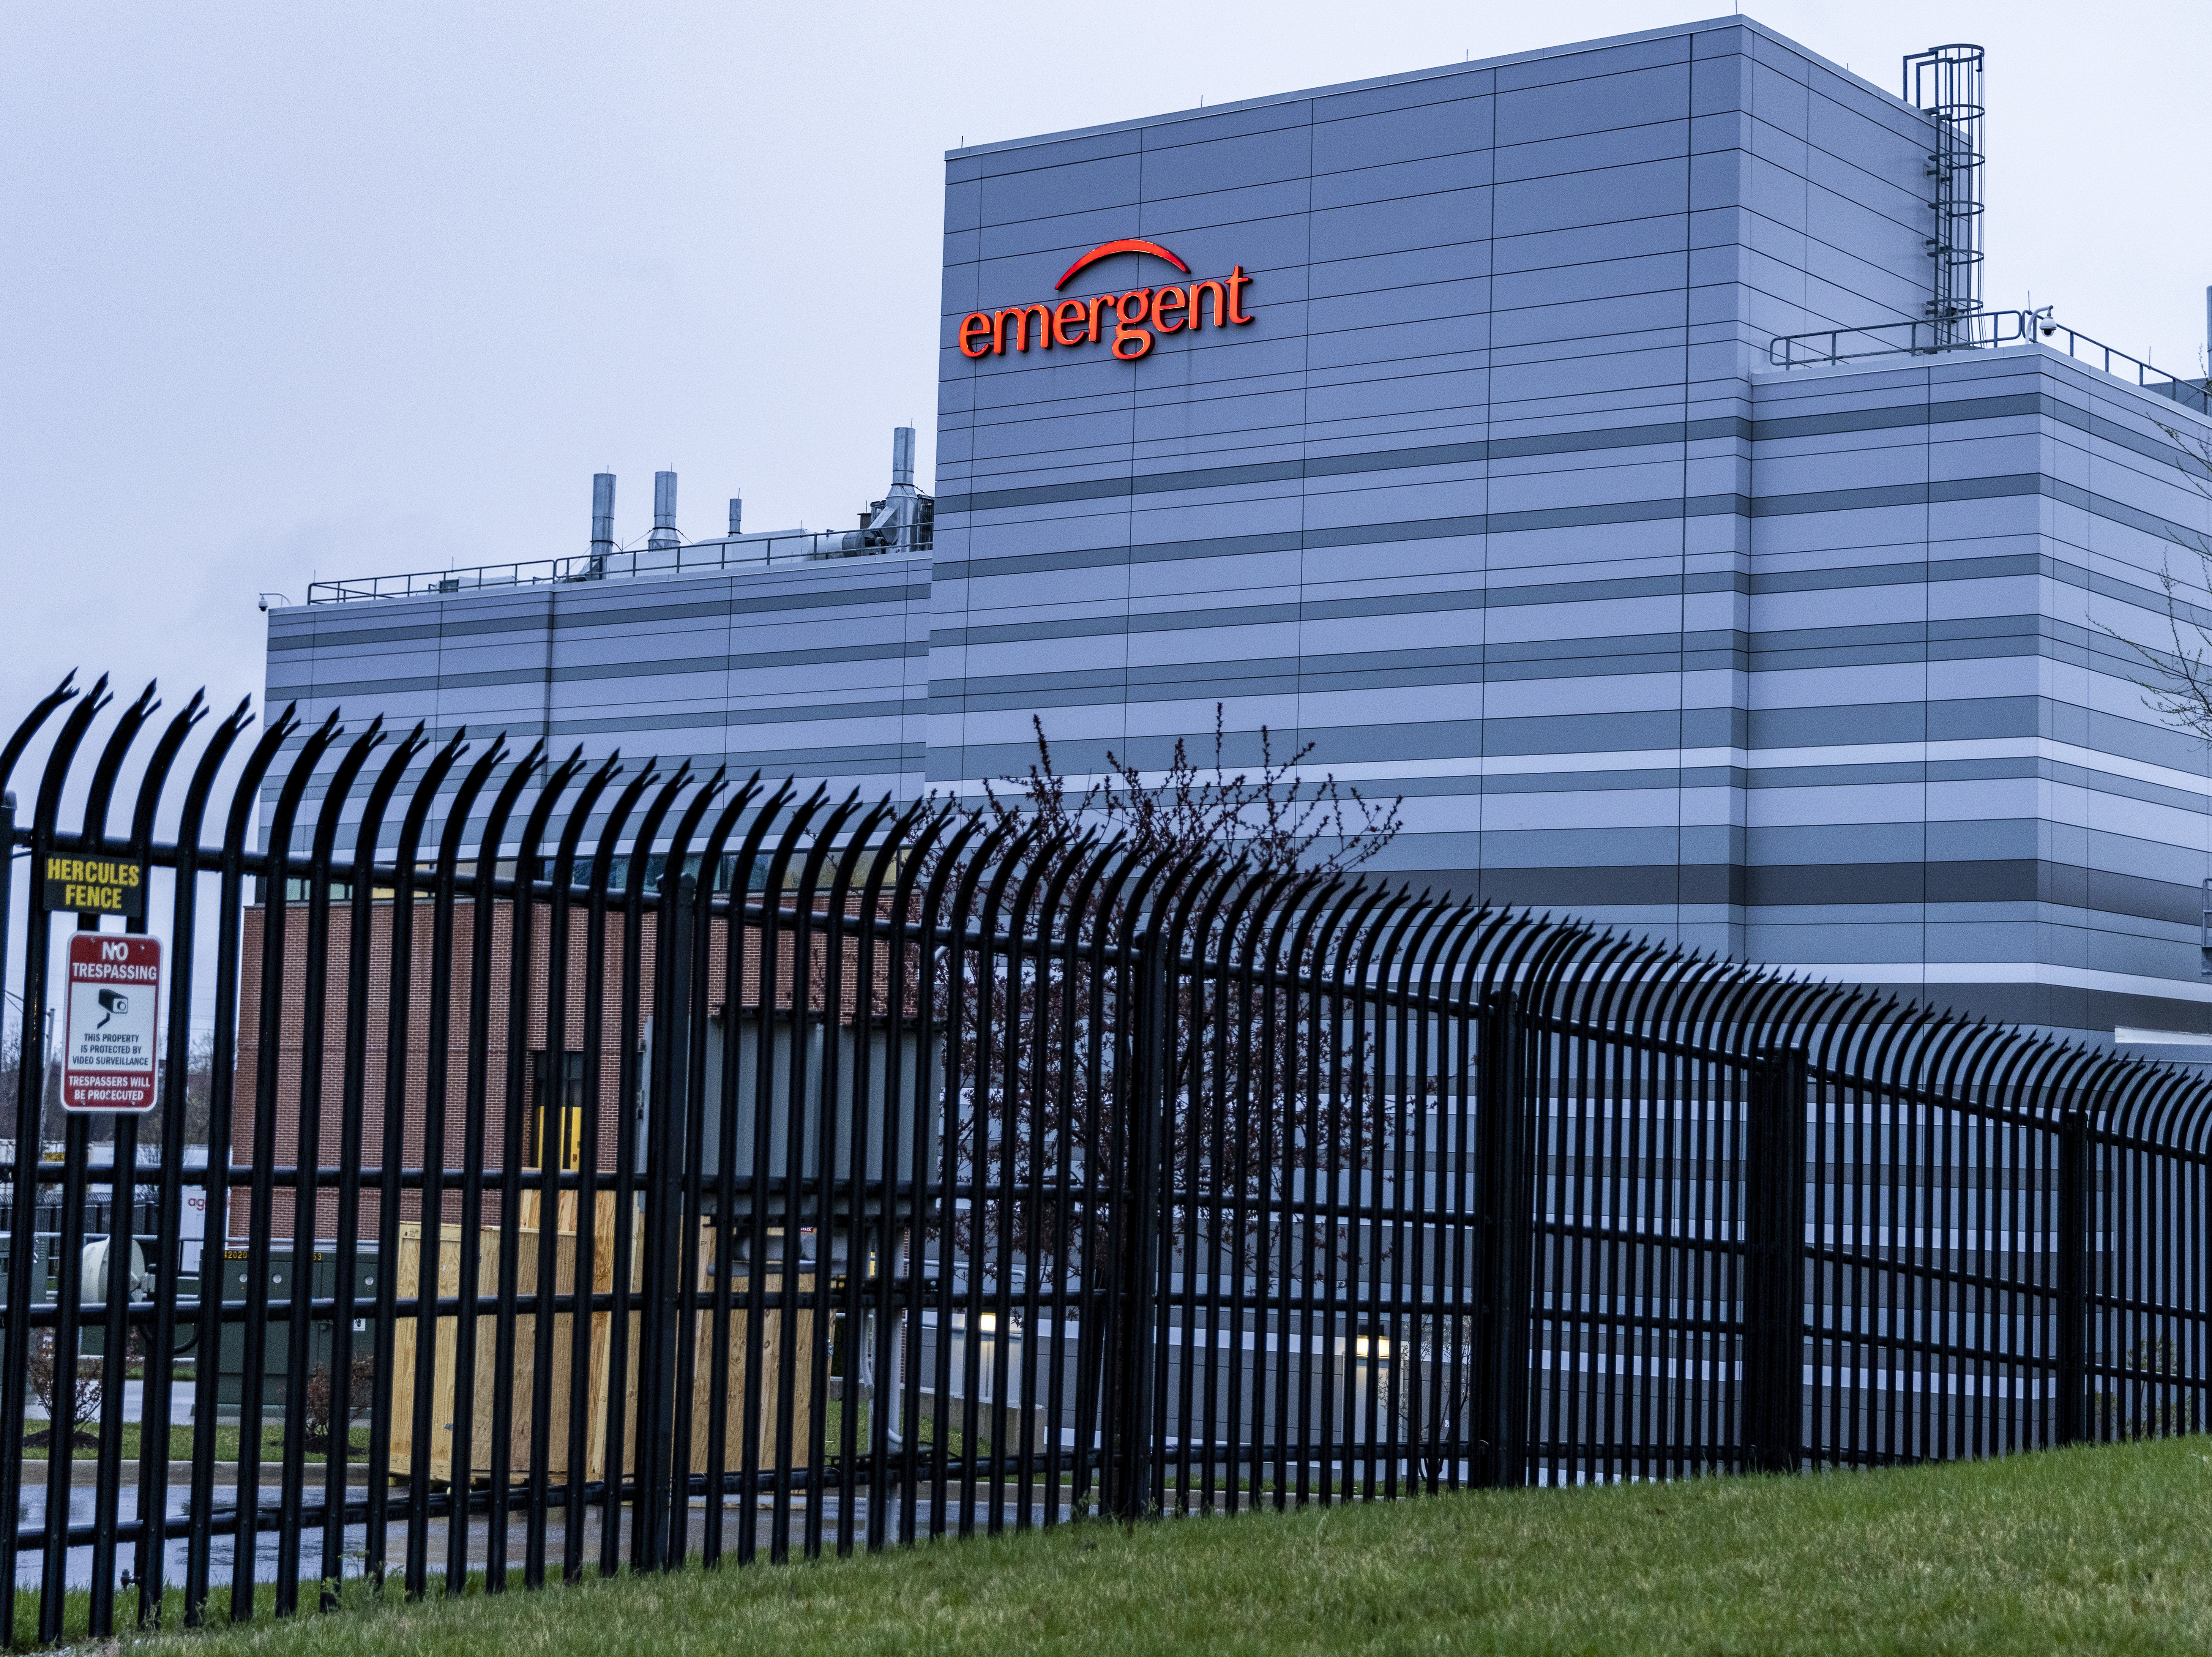 The Emergent BioSolutions Bayview Campus plant in Baltimore has stopped producing vaccine material following an FDA inspection that found numerous problems. The plant was slated to become part of the Johnson & Johnson COVID-19 vaccine production process. Tasos Katopodis/Getty Images